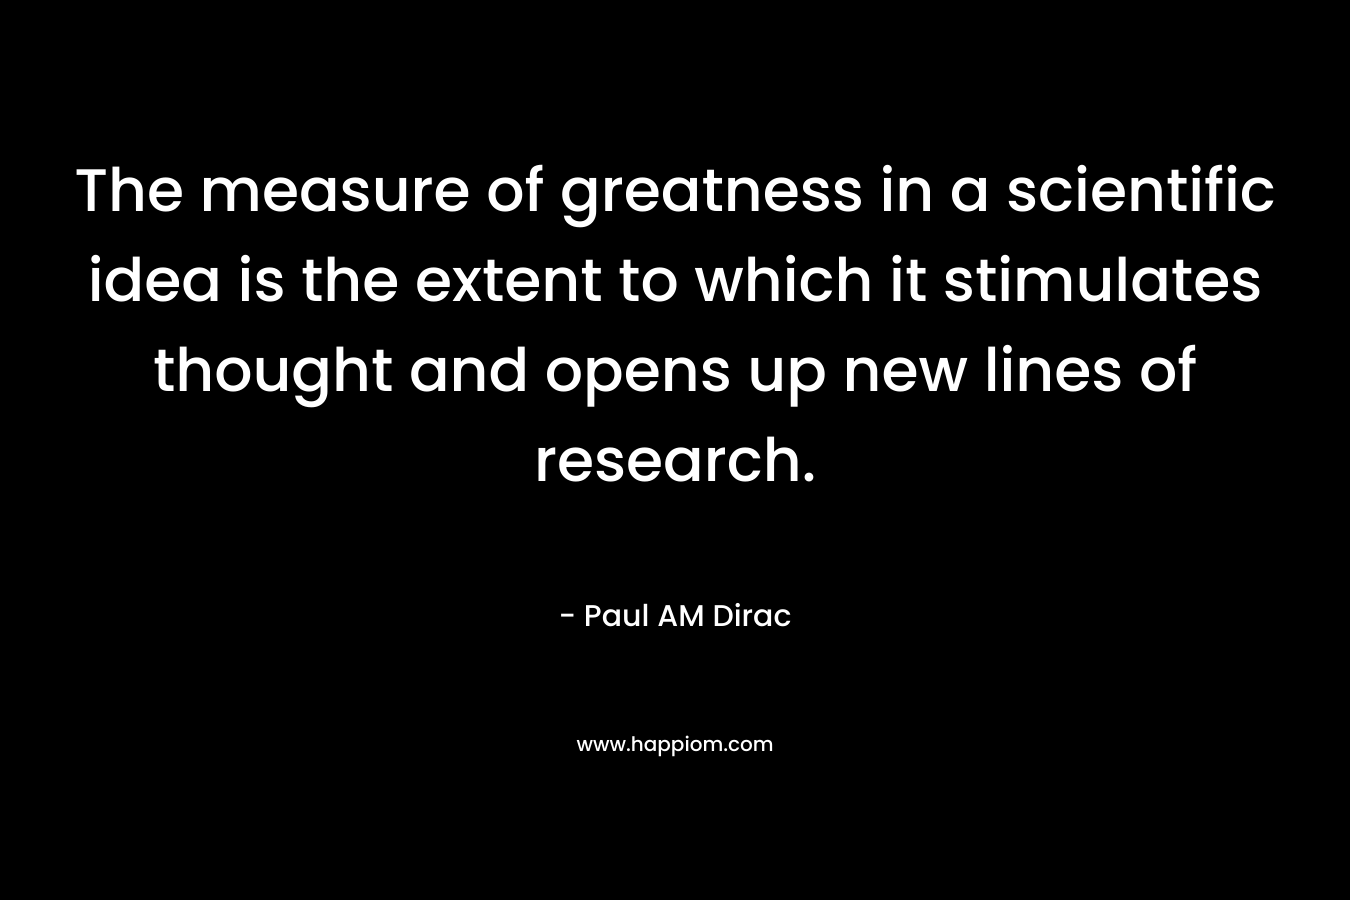 The measure of greatness in a scientific idea is the extent to which it stimulates thought and opens up new lines of research.